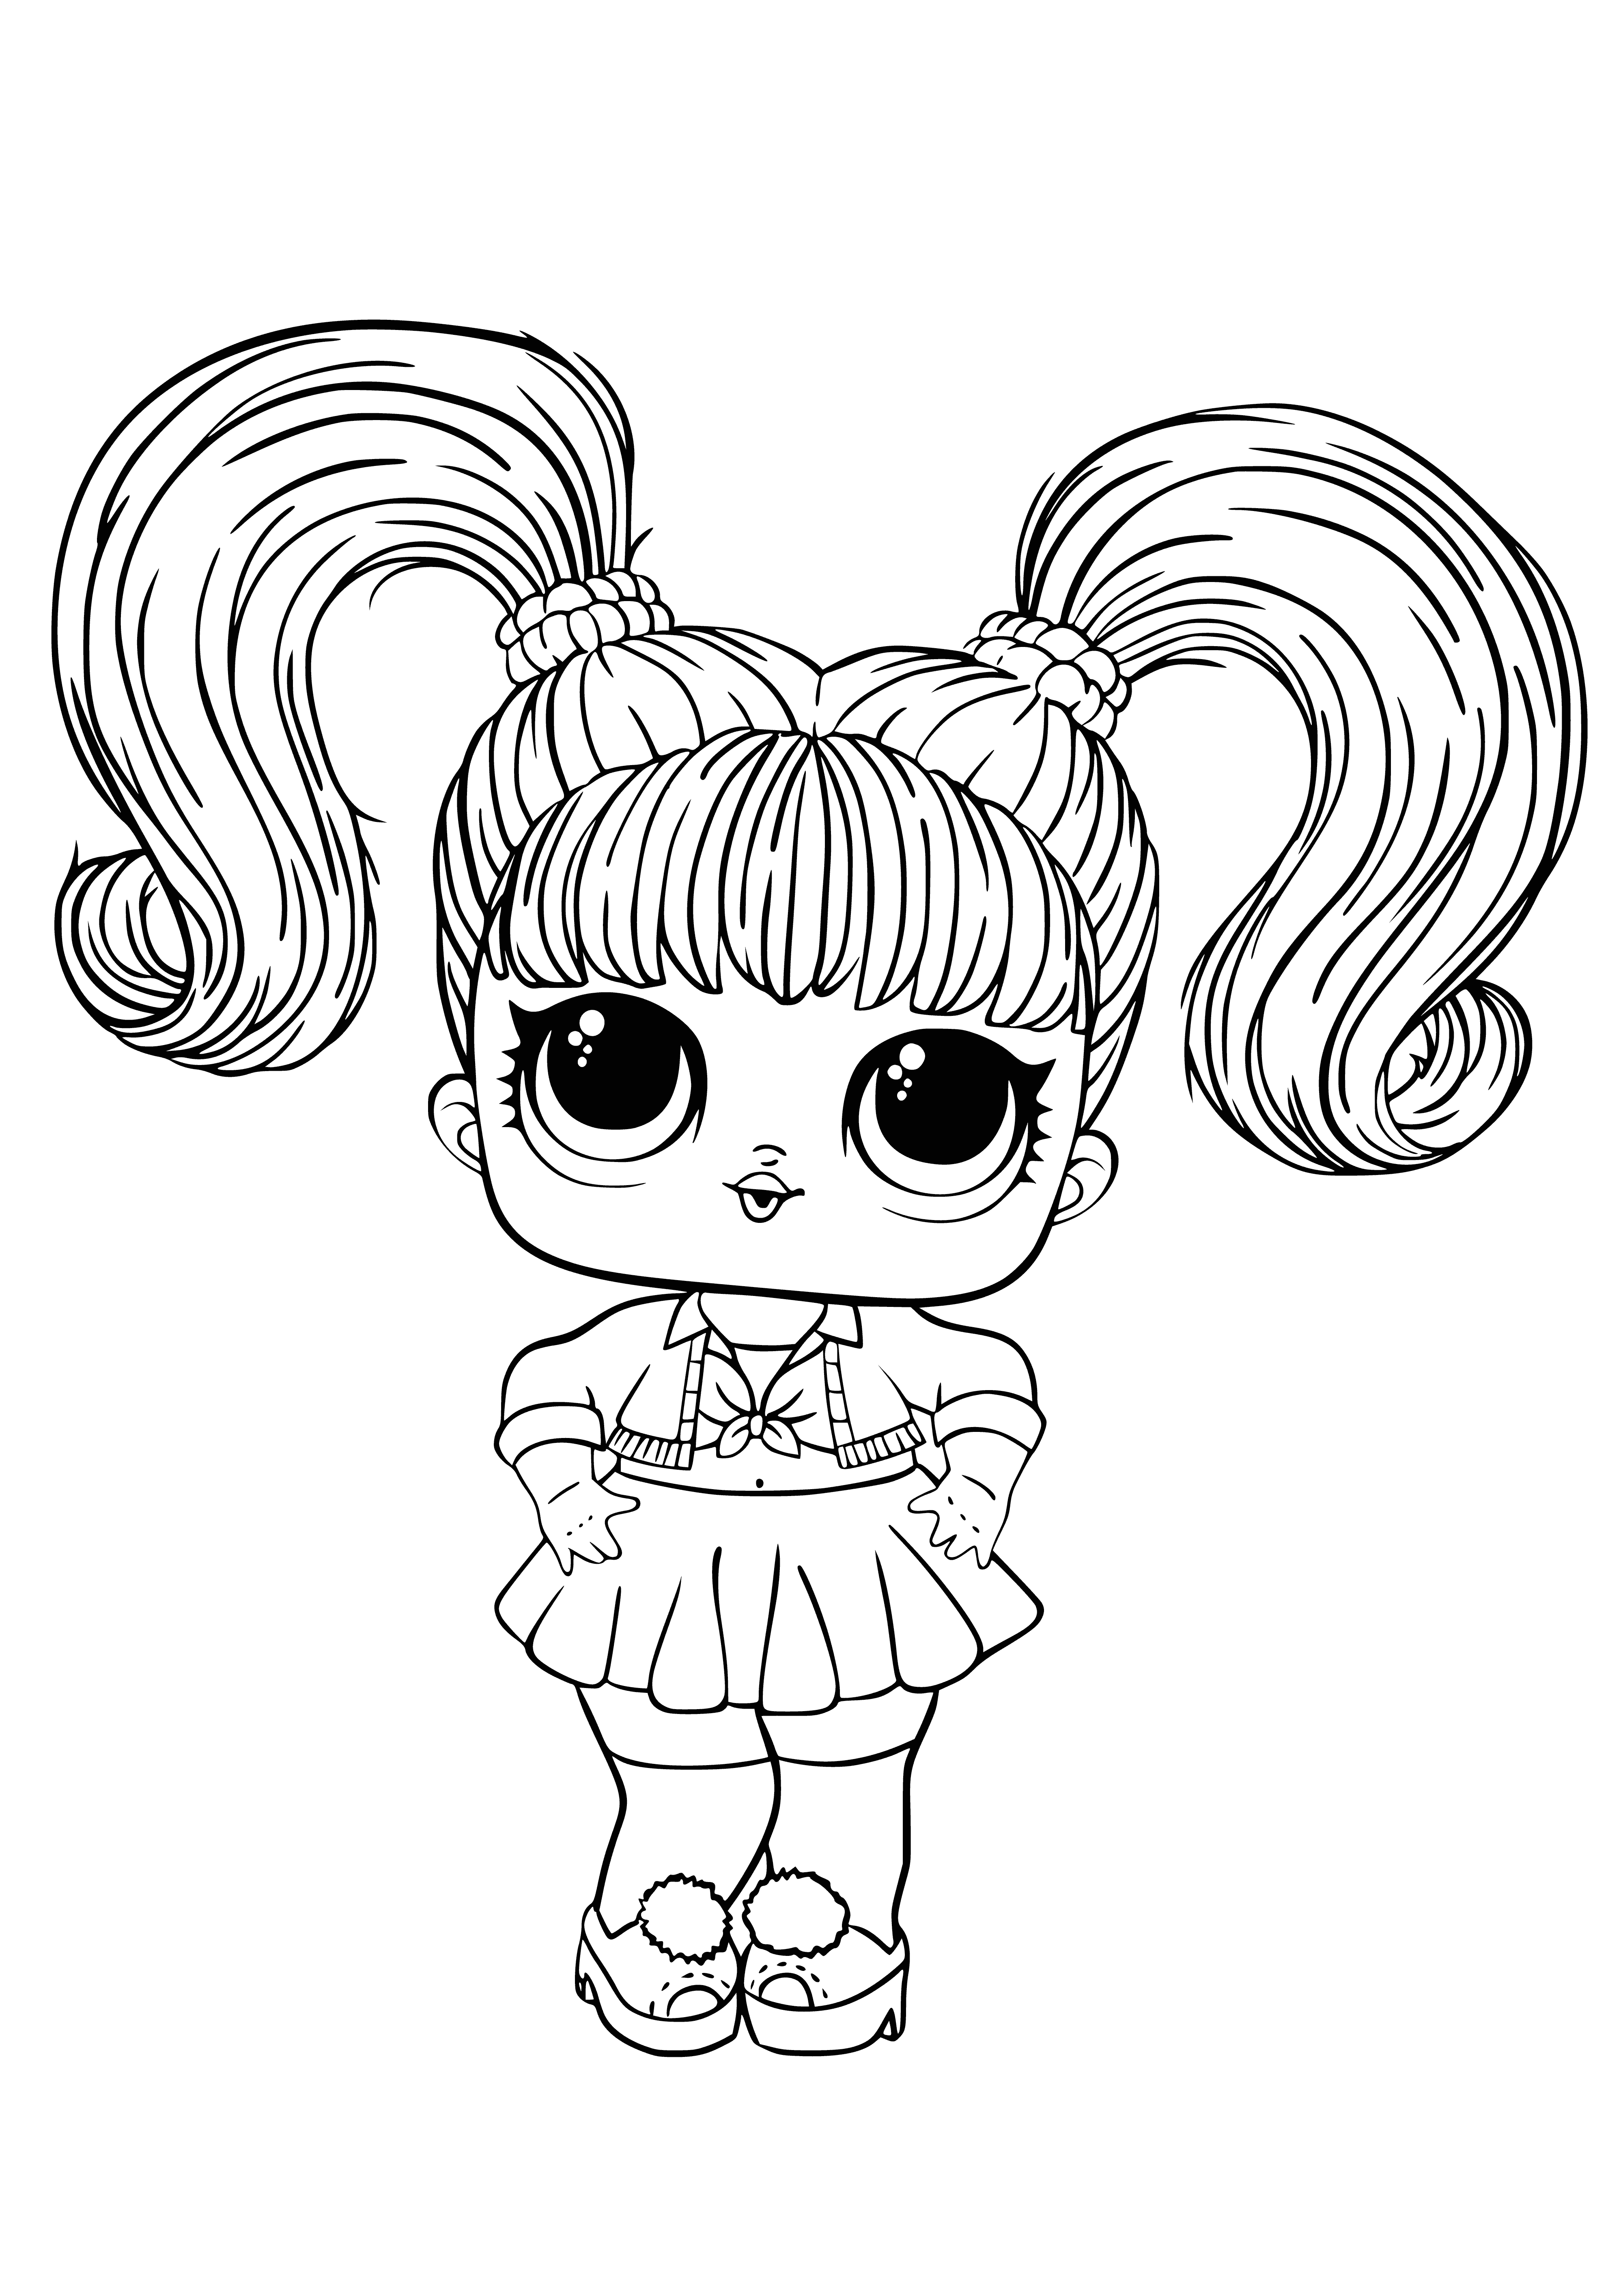 LOL Oops-Baby (baby Britney Spears) coloring page